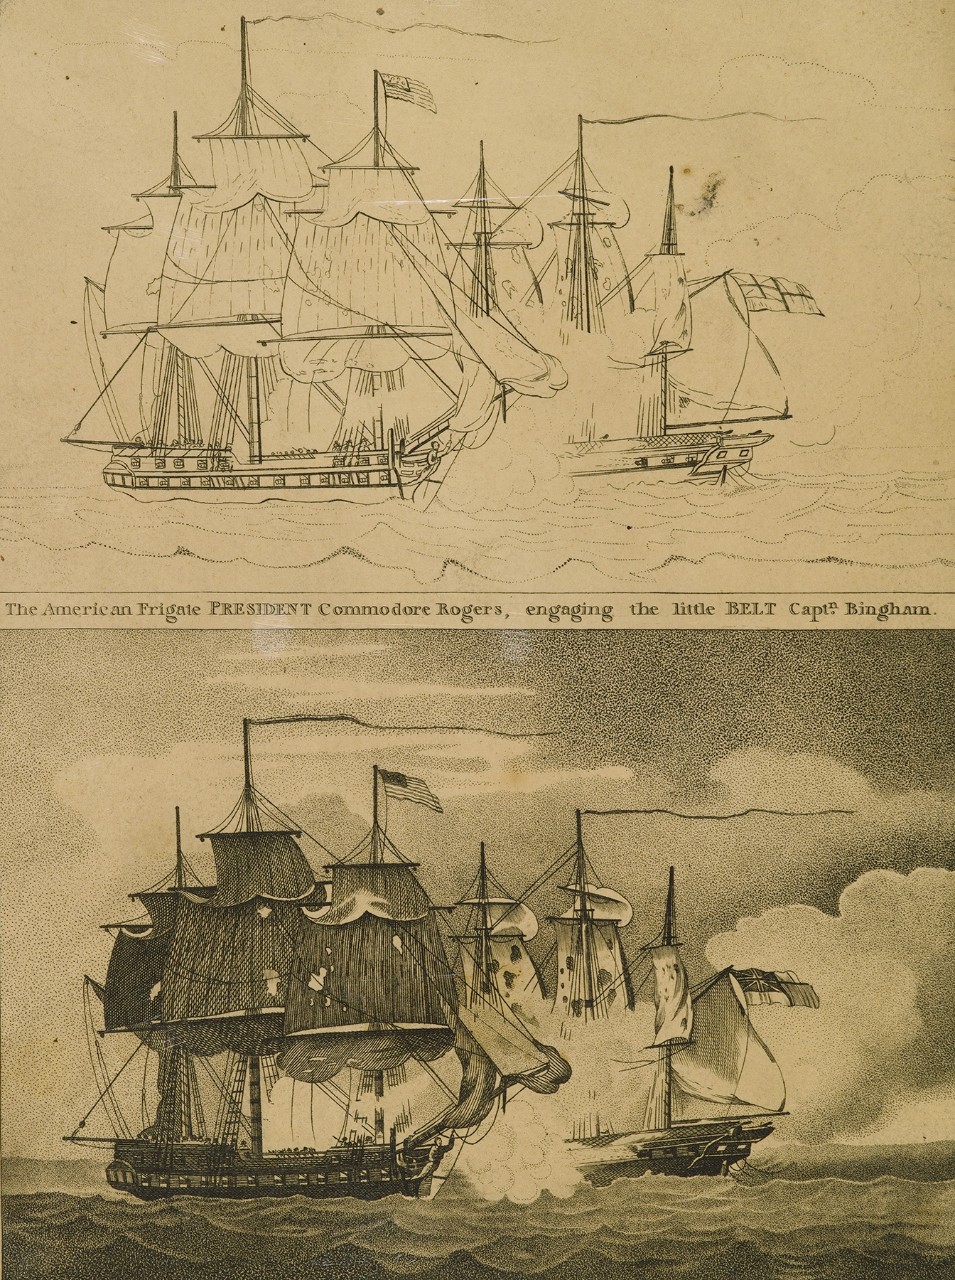 There are two images of the same sailing ship battle the top one is in progress, the bottom one is completed.